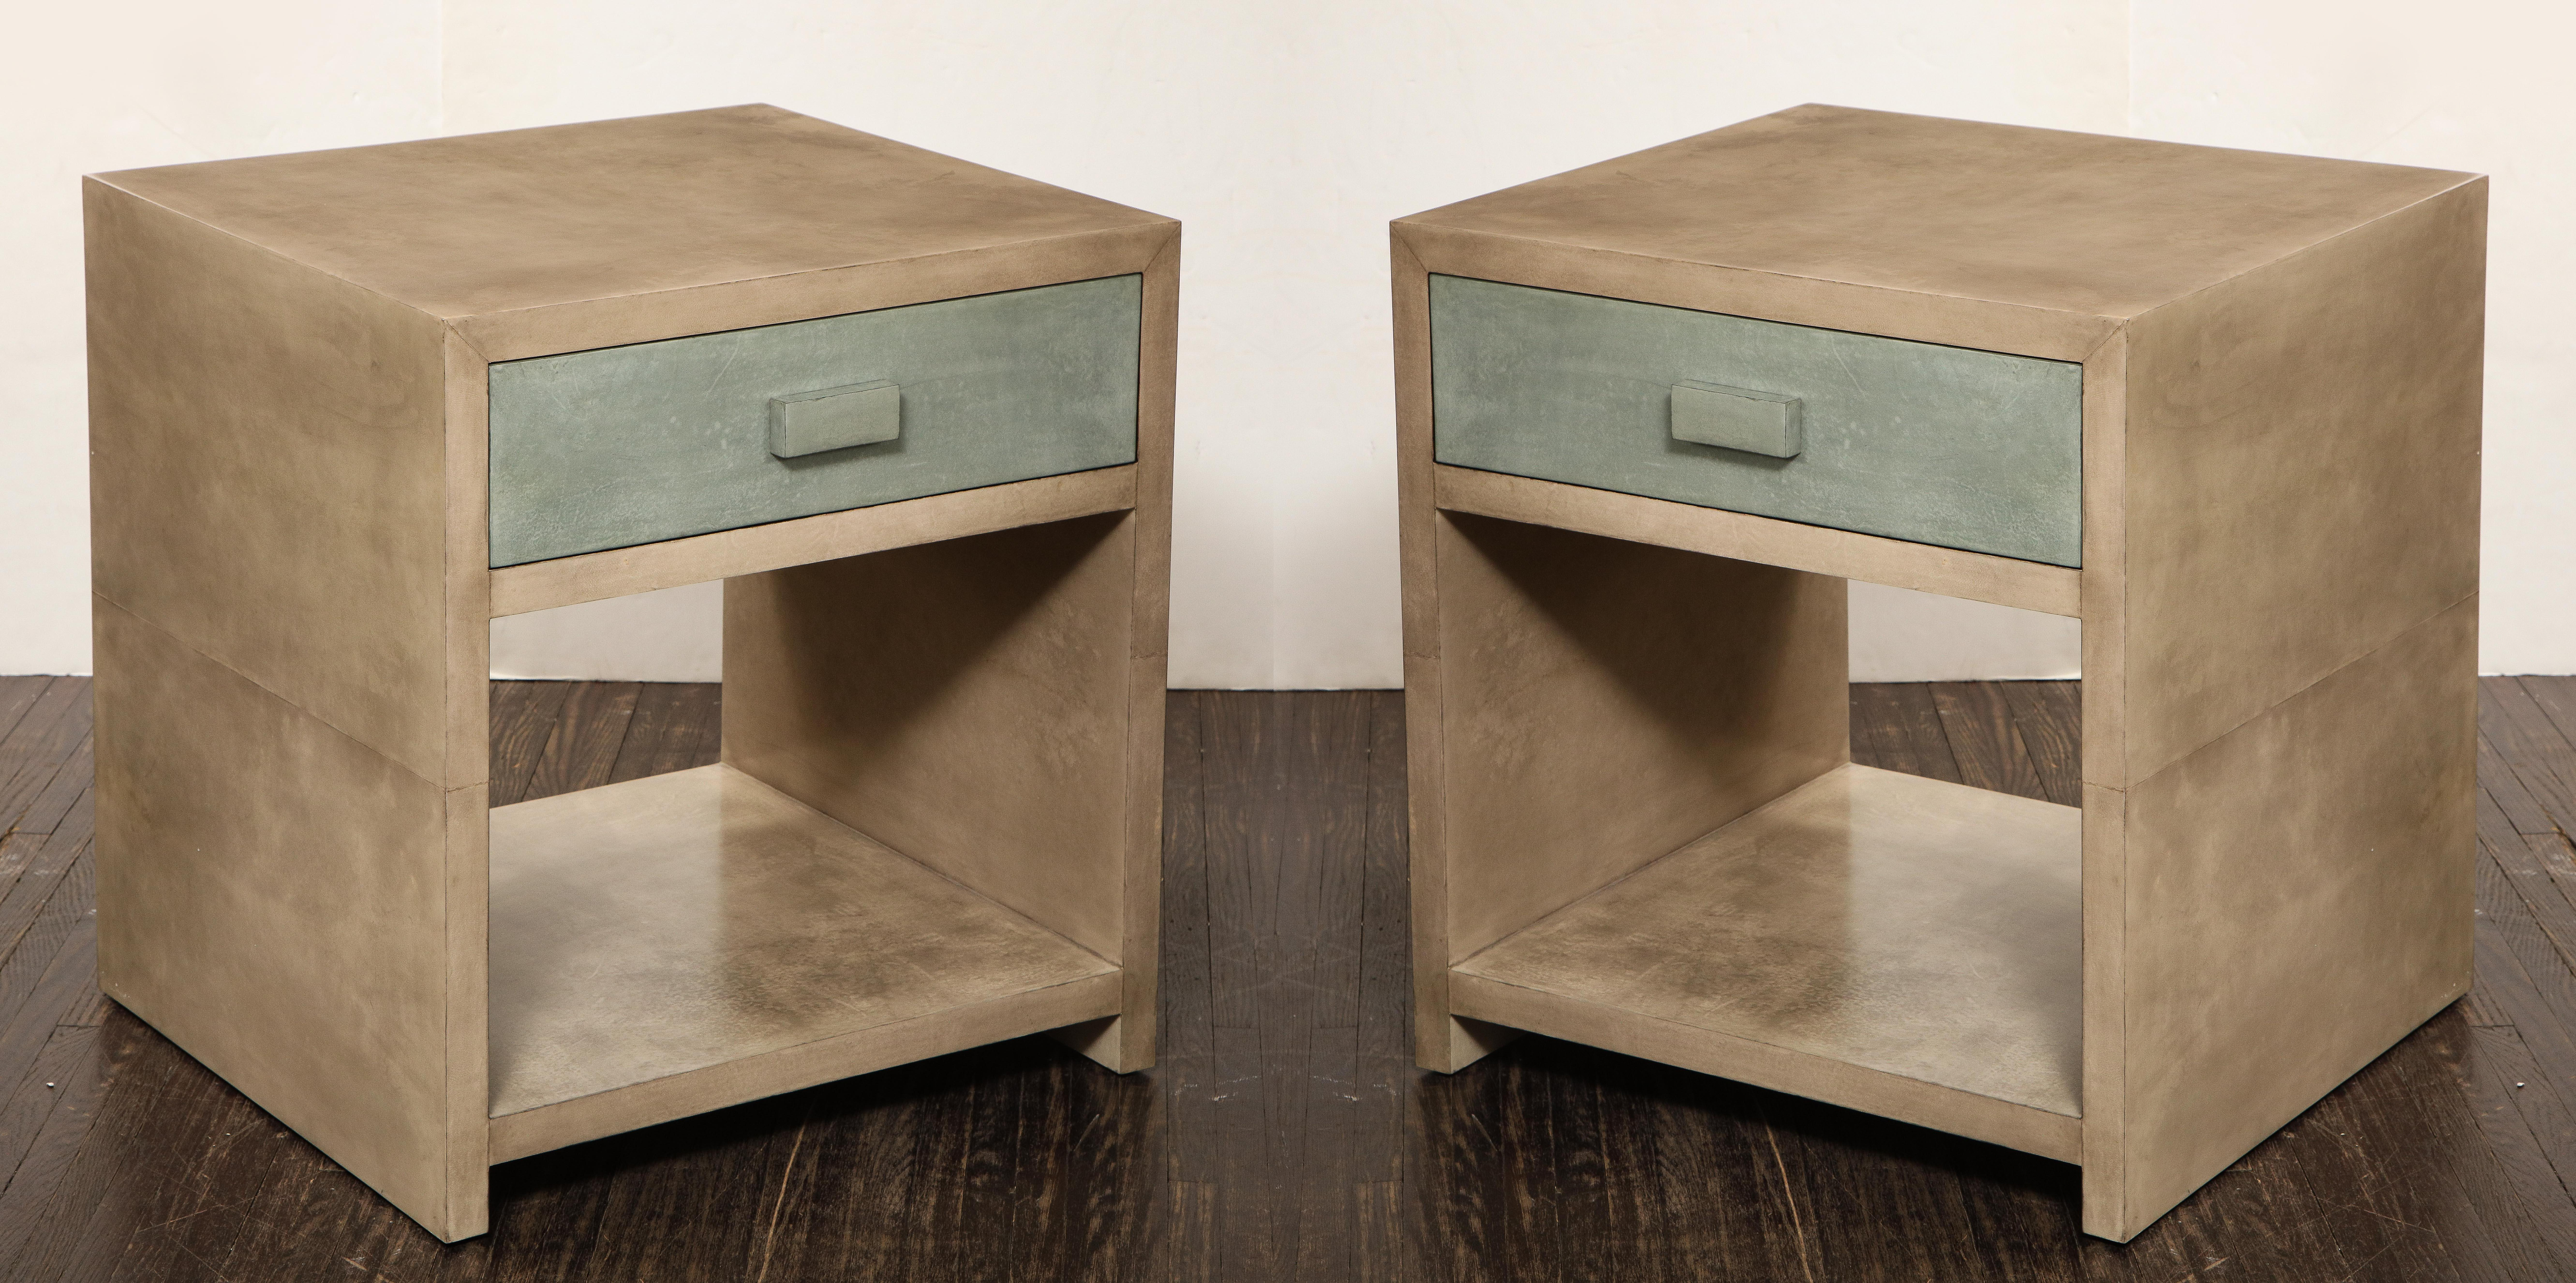 This pair of parchment nightstands are available for a custom order. The interior drawers are made of the same walnut finish seen in the image of the back. Customization is available to the dimension, design, and finishes.